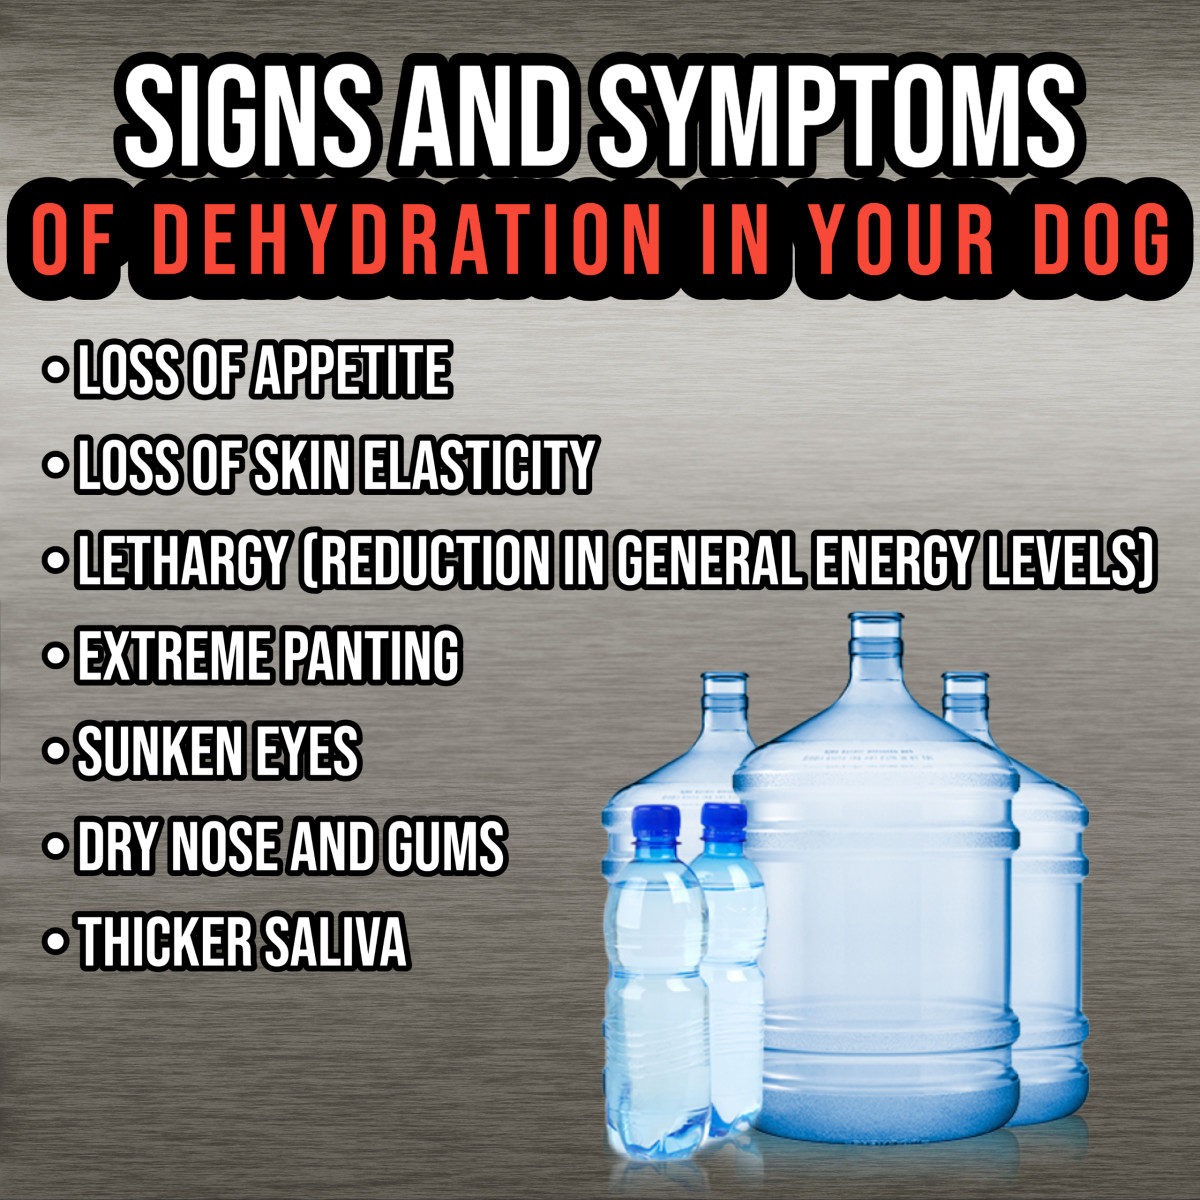 Signs and symptoms of dehydration in the Curly-Coated Retriever.